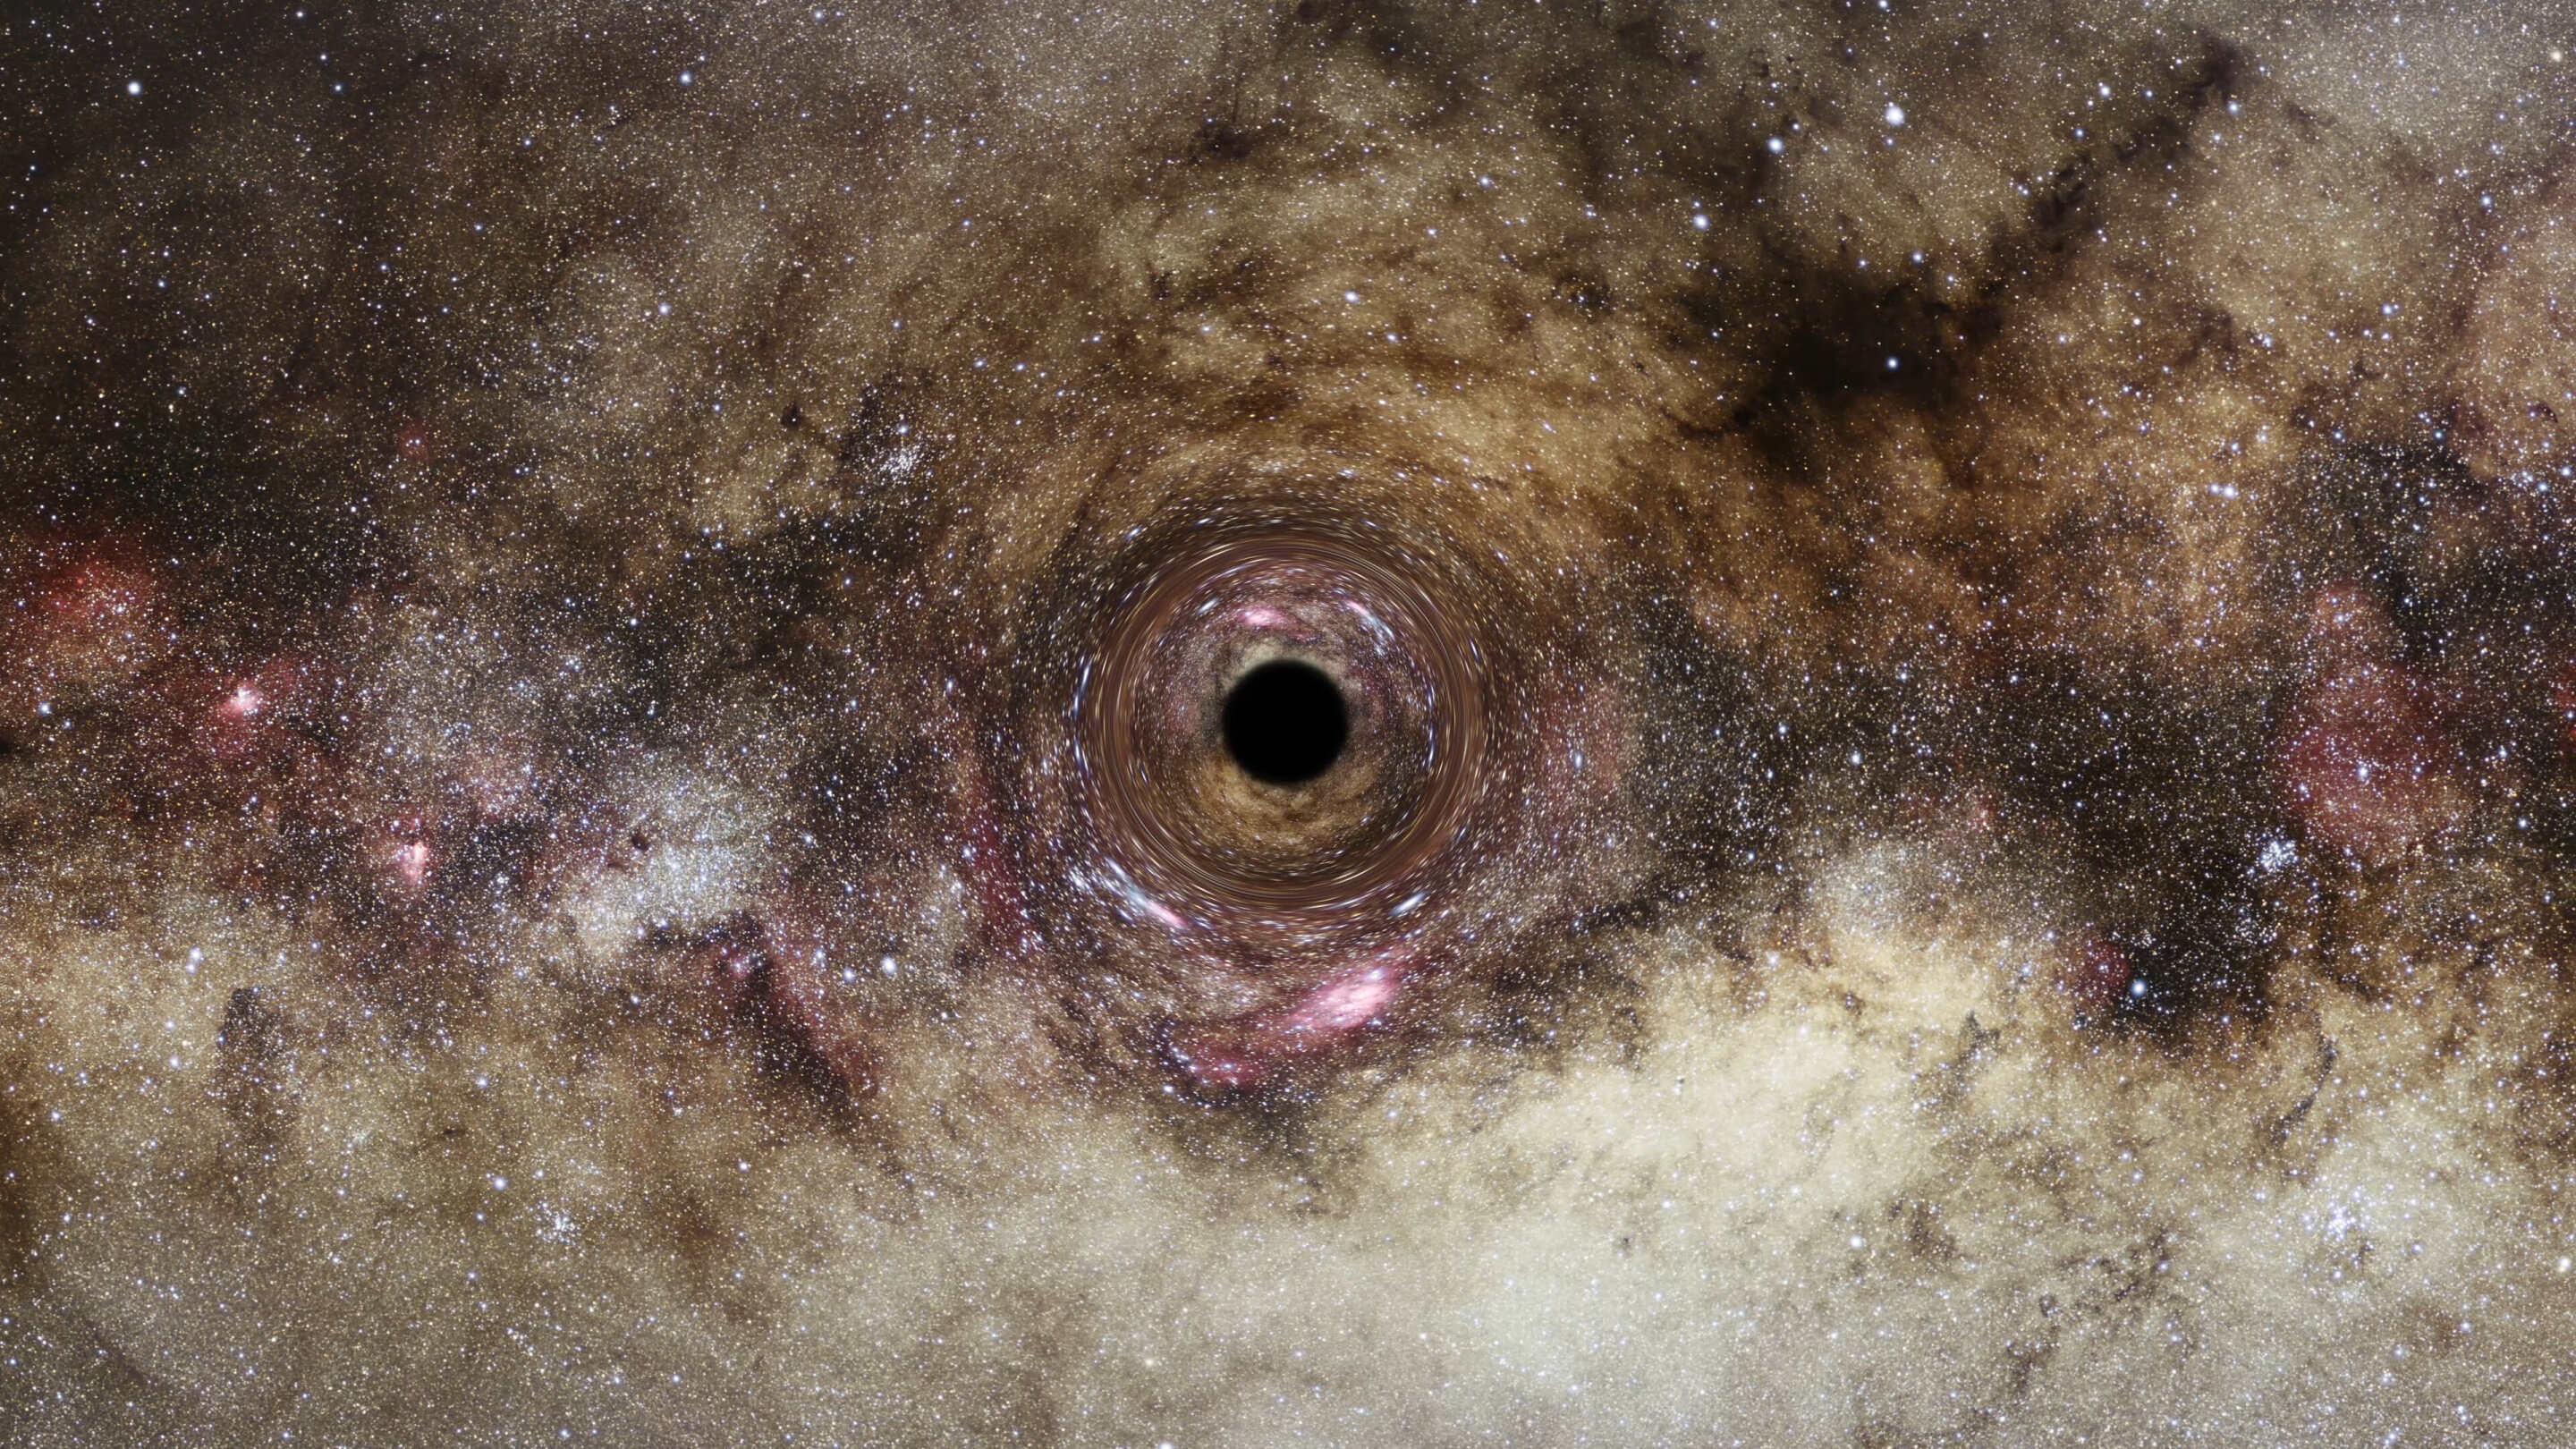 Light-bending gravity reveals one of the biggest black holes ever found - Phys.org